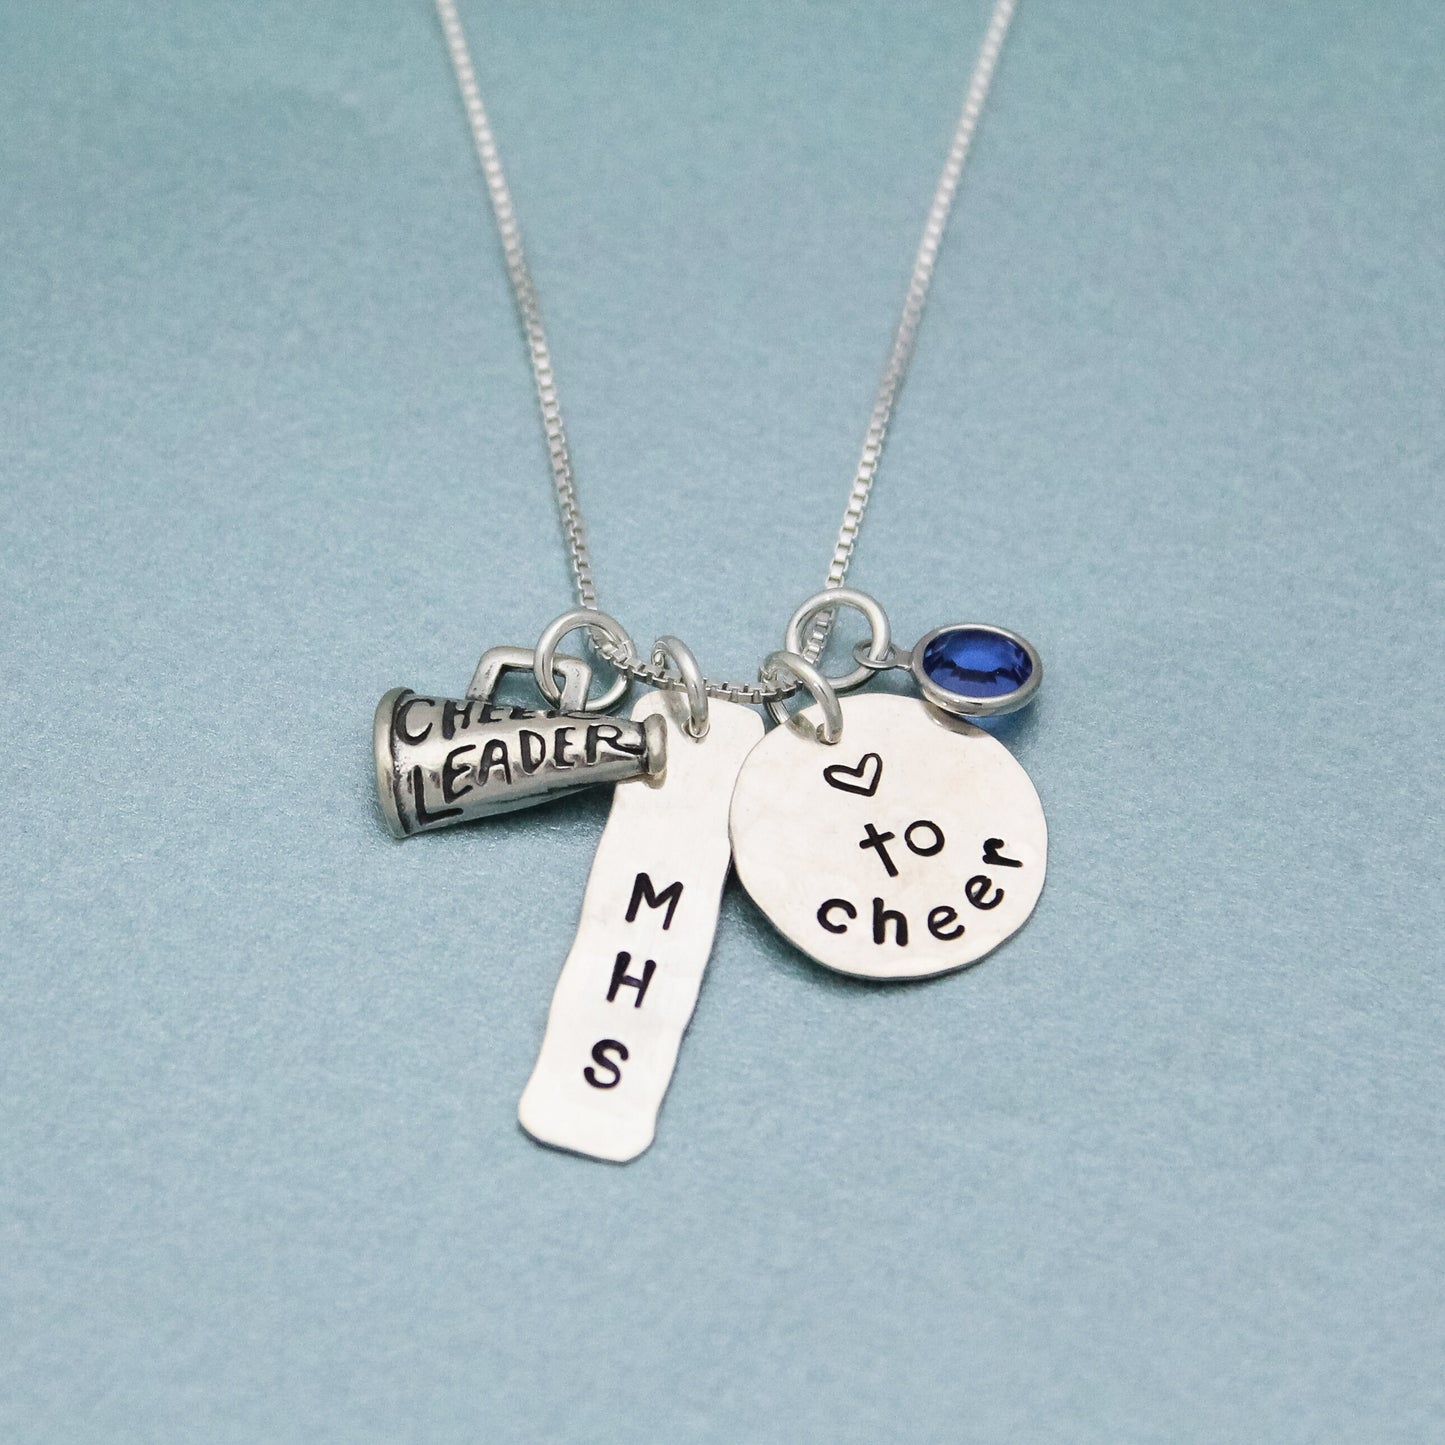 Personalized Cheerleading Necklace, Gifts for Cheerleaders, Cheer Mom Jewelry, Love to Cheer Necklace, Cheerleader Gift, Pepsquad Gift